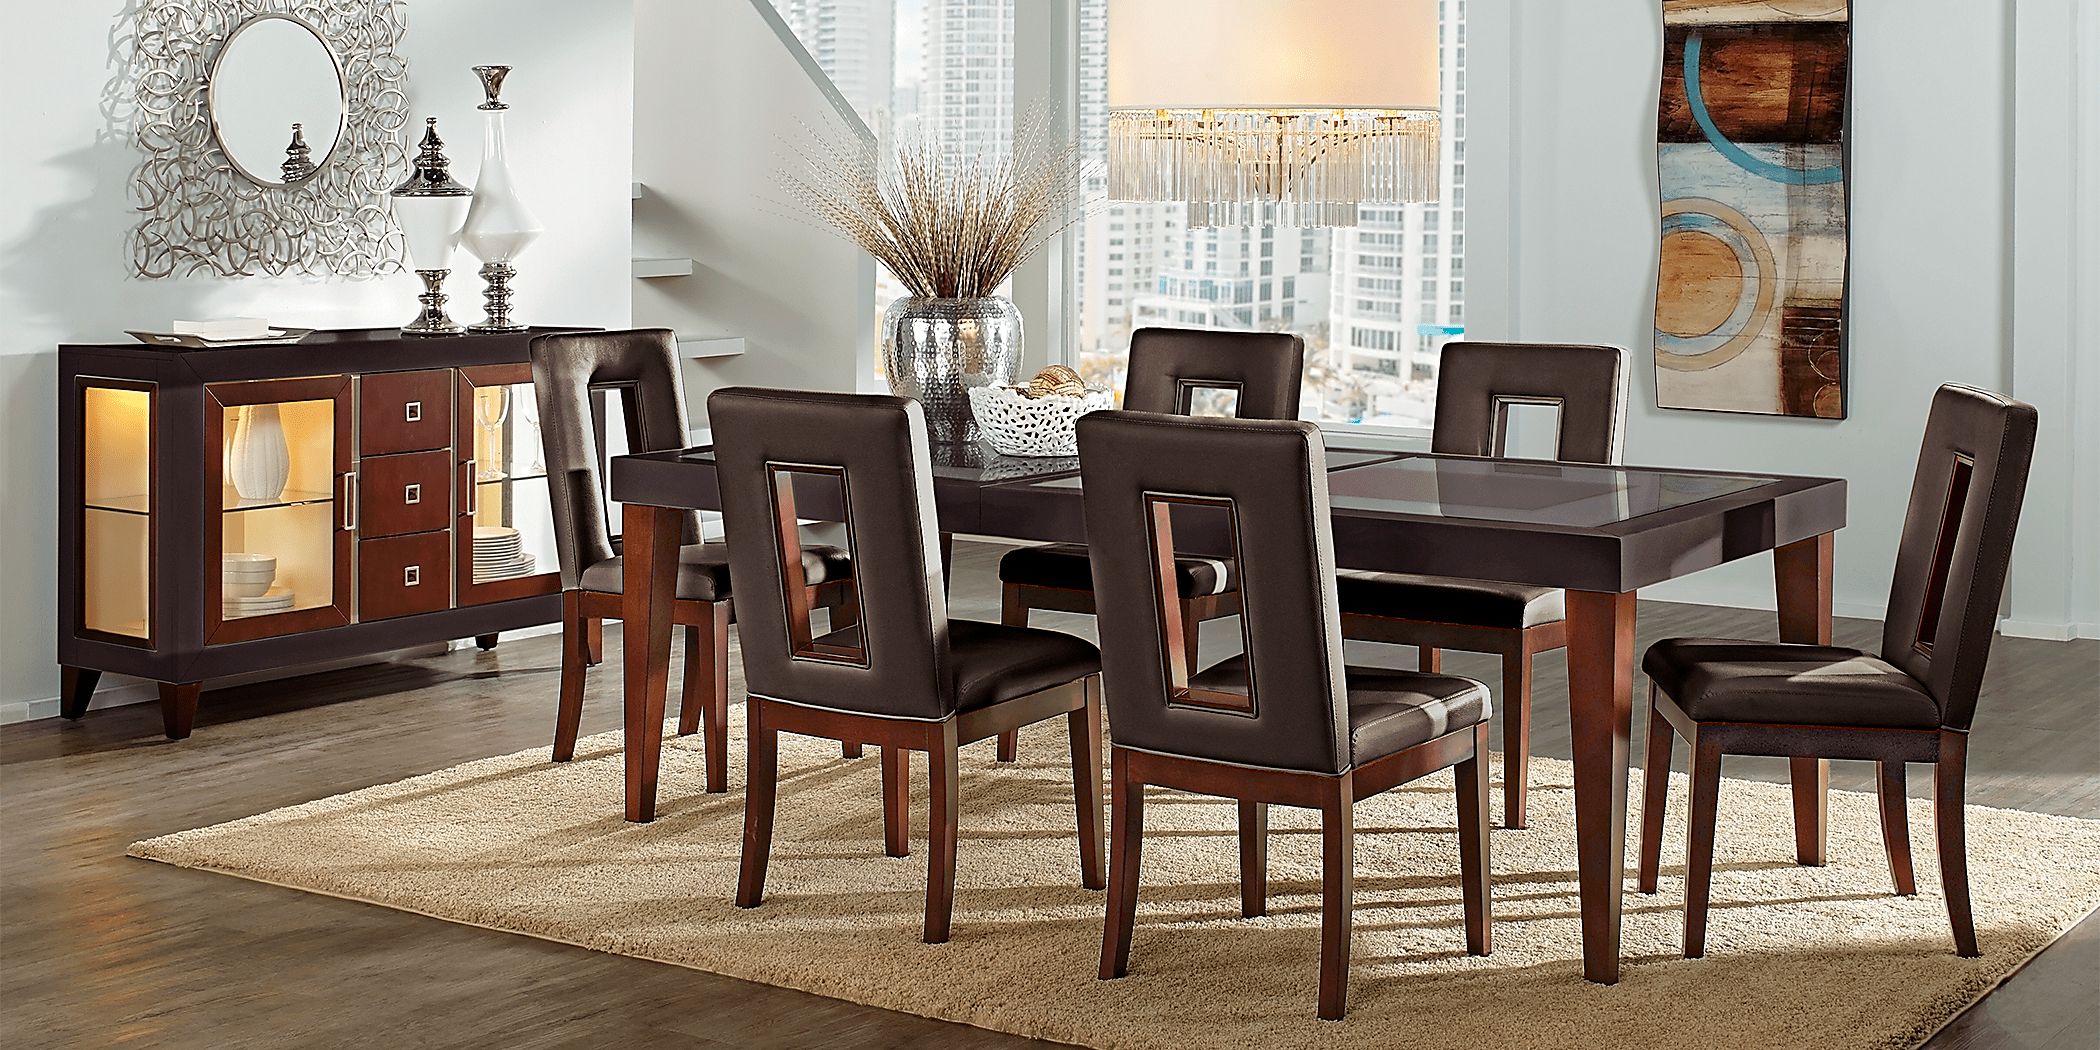 Savona Chocolate 5 Pc Rectangle Dining Room with Open Back Chairs